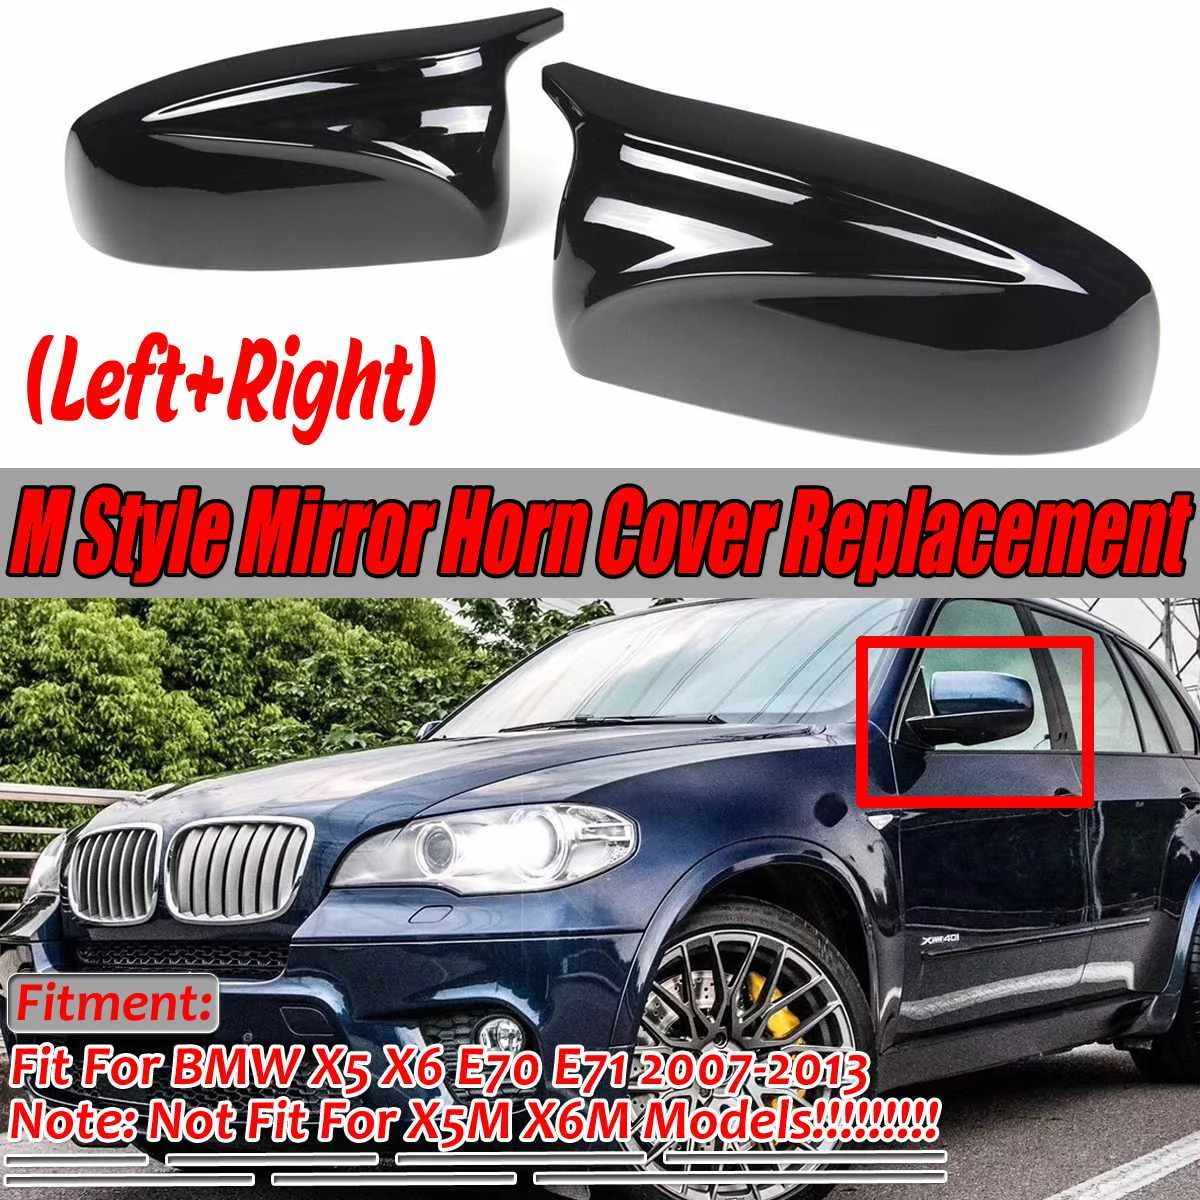 Fit For BMW X5 X6 E70 E71 2008-13 Real Carbon Fiber Car Door Speaker Ring Cover